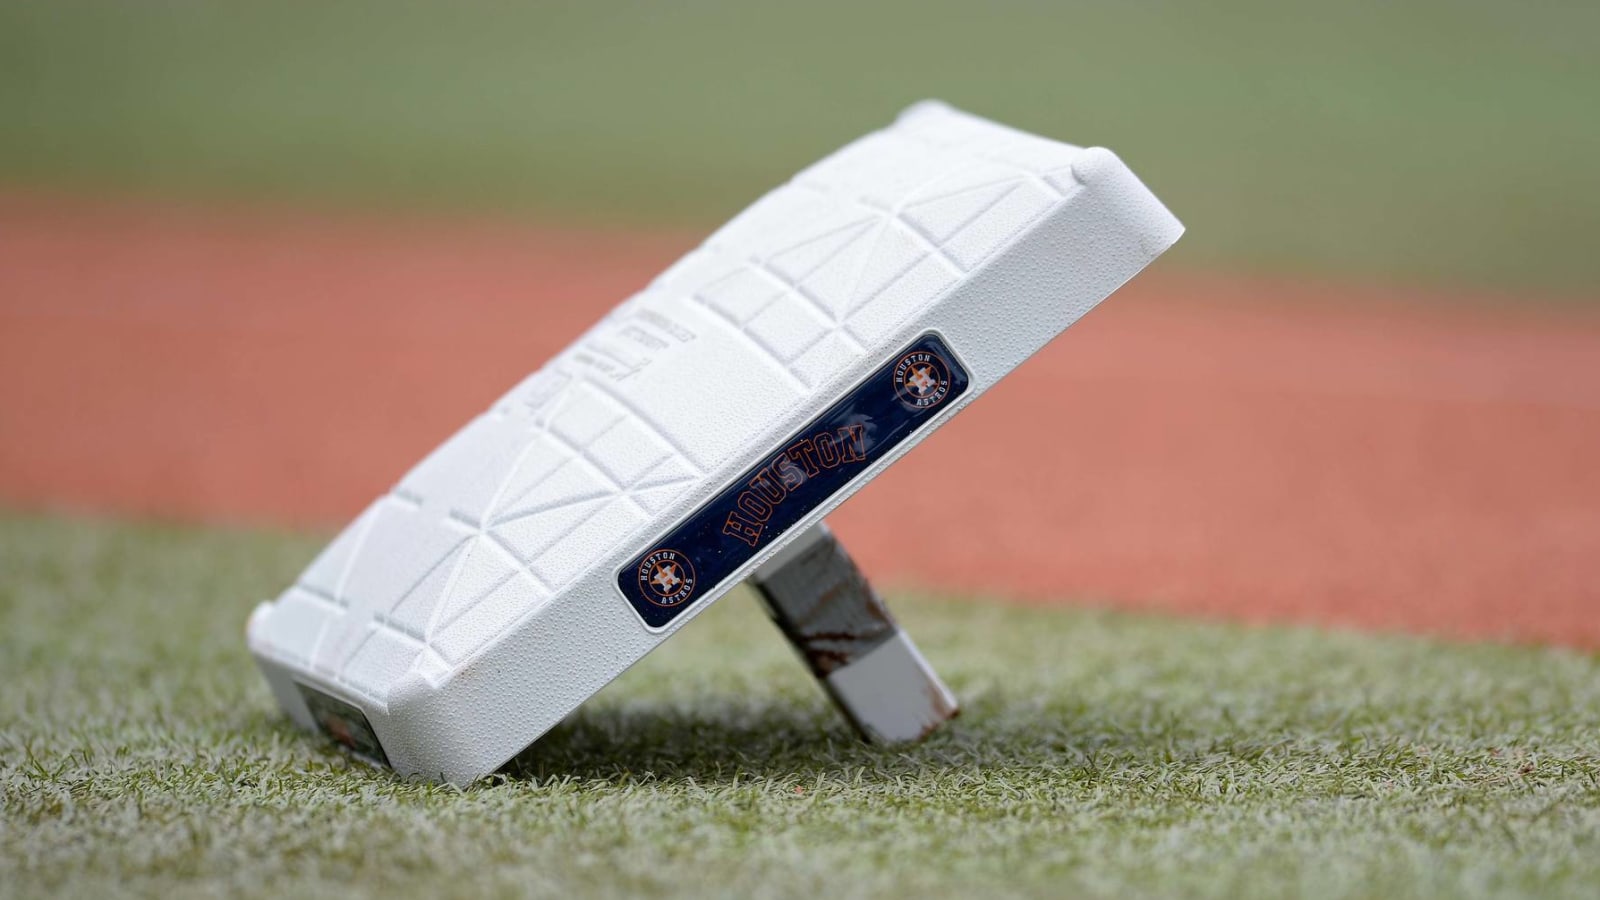 Judge dismisses one sign-stealing suit against Red Sox, Astros